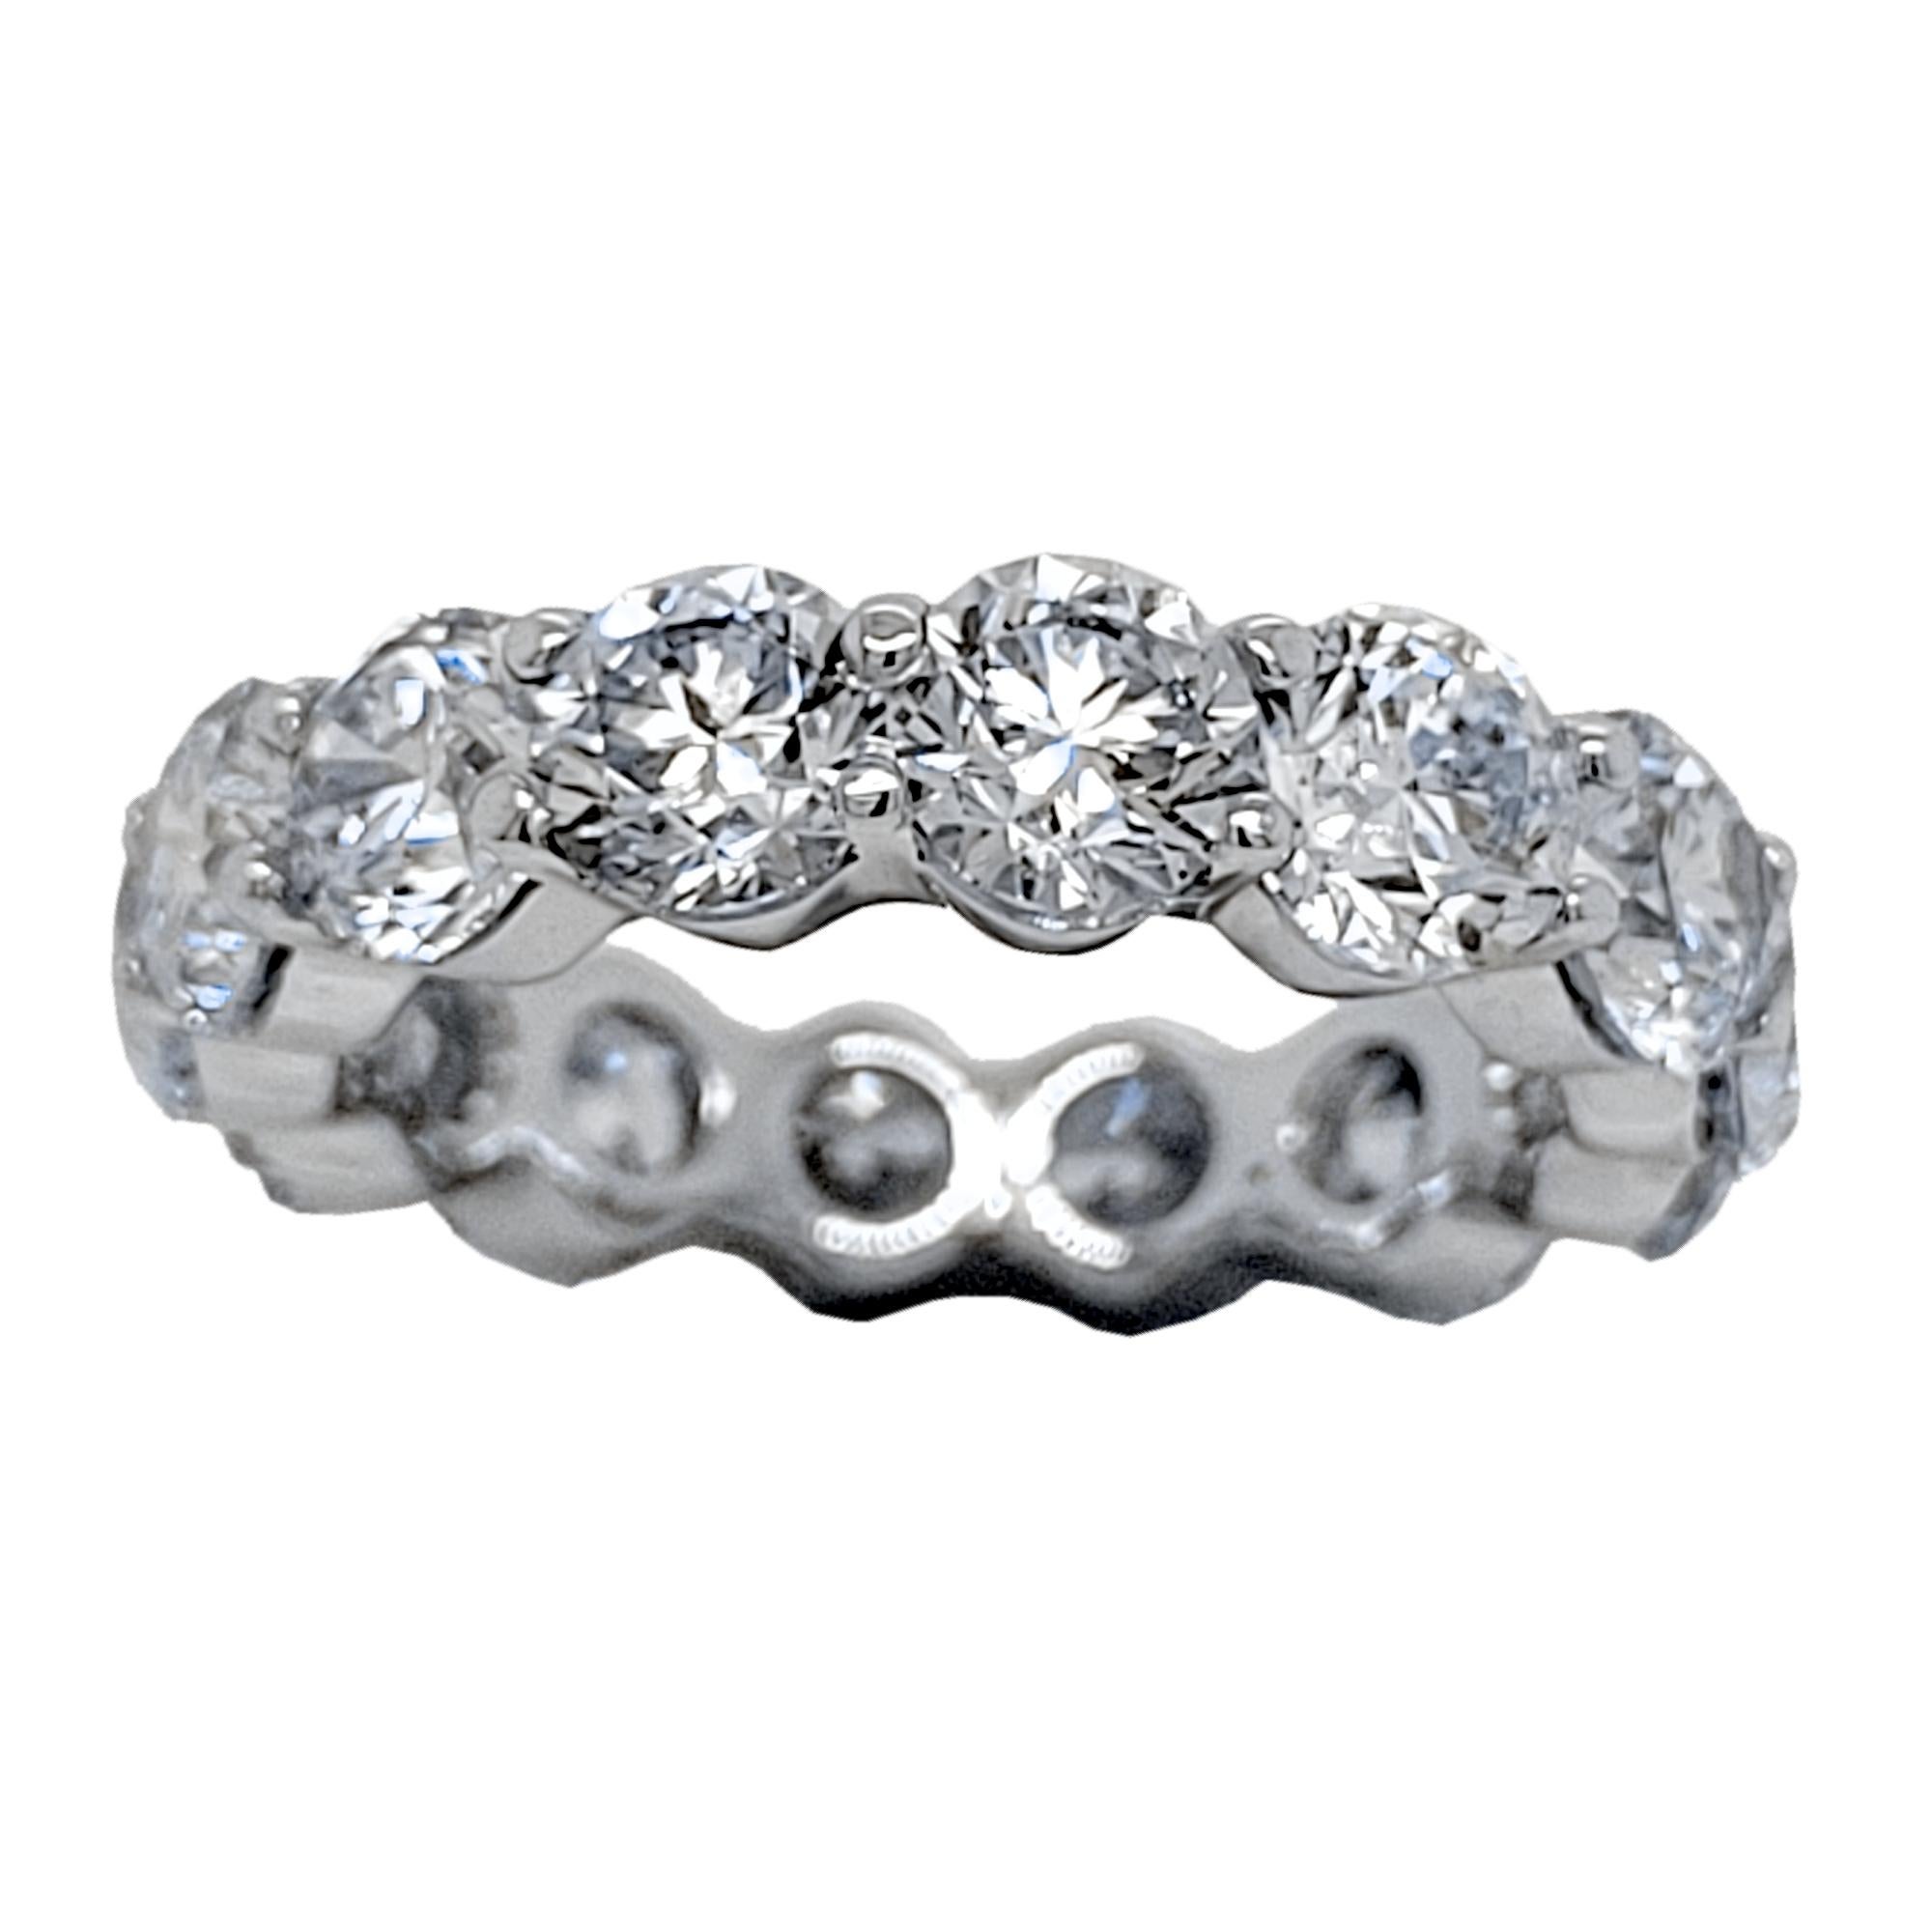 This beautiful Eternity Ring is made in 18K Gold with 14 perfectly matched 5mm Round Brilliant Diamonds Set in Shared Prong Mode In a 18K Gold mounting.
Total Weight of diamonds: 6.53 Ct  SI/F-G
Total Weight of the Ring: 6.1 Gr 18K Gold
Ring Size: